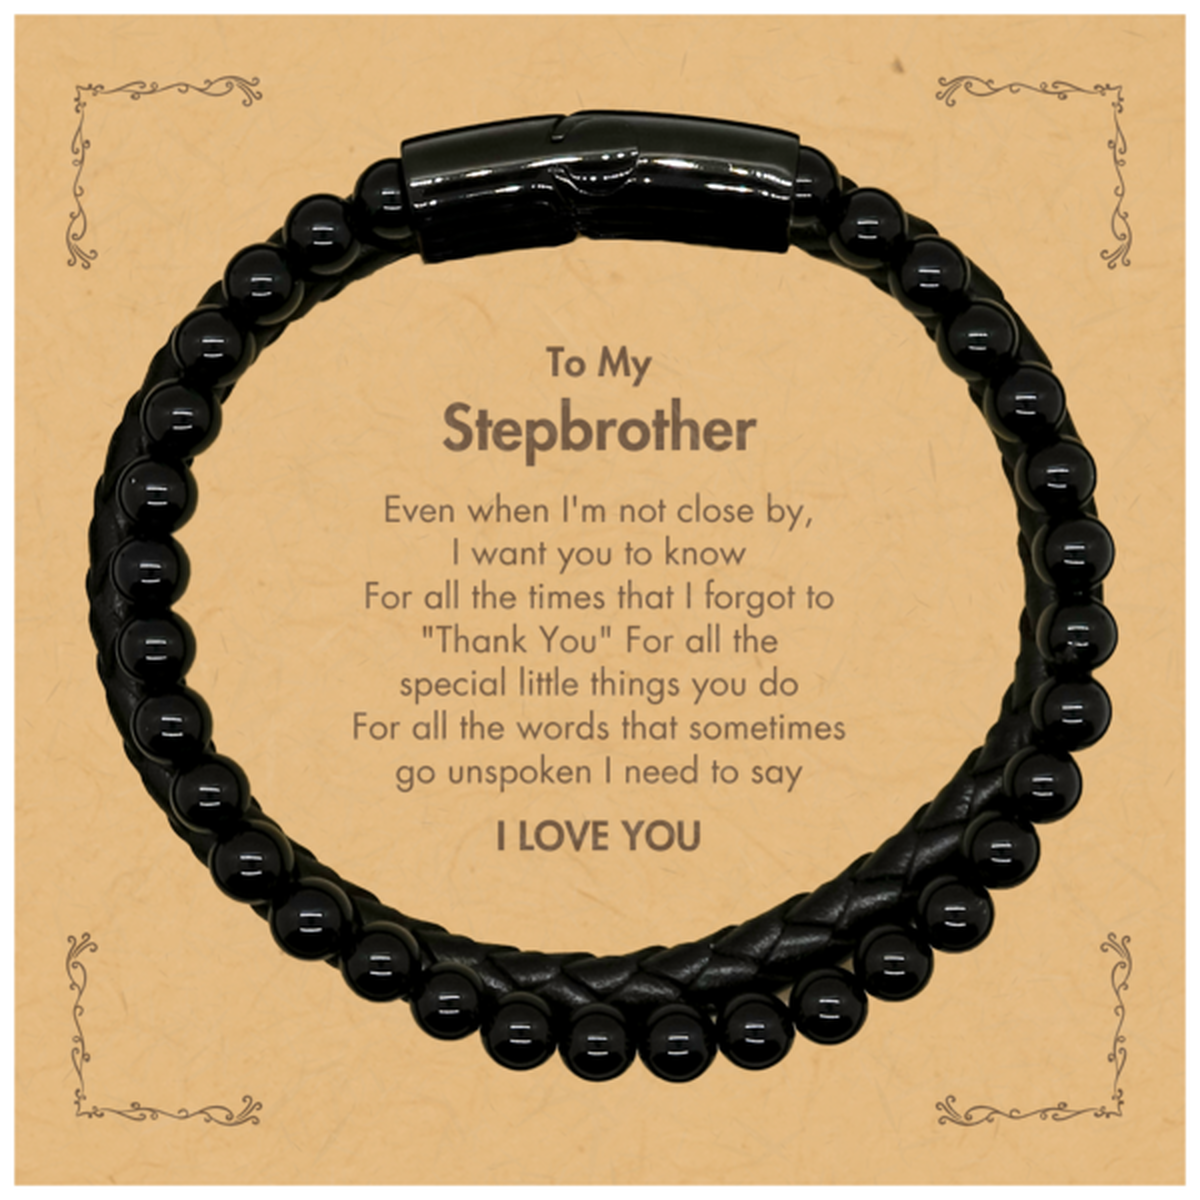 Thank You Gifts for Stepbrother, Keepsake Stone Leather Bracelets Gifts for Stepbrother Birthday Mother's day Father's Day Stepbrother For all the words That sometimes go unspoken I need to say I LOVE YOU